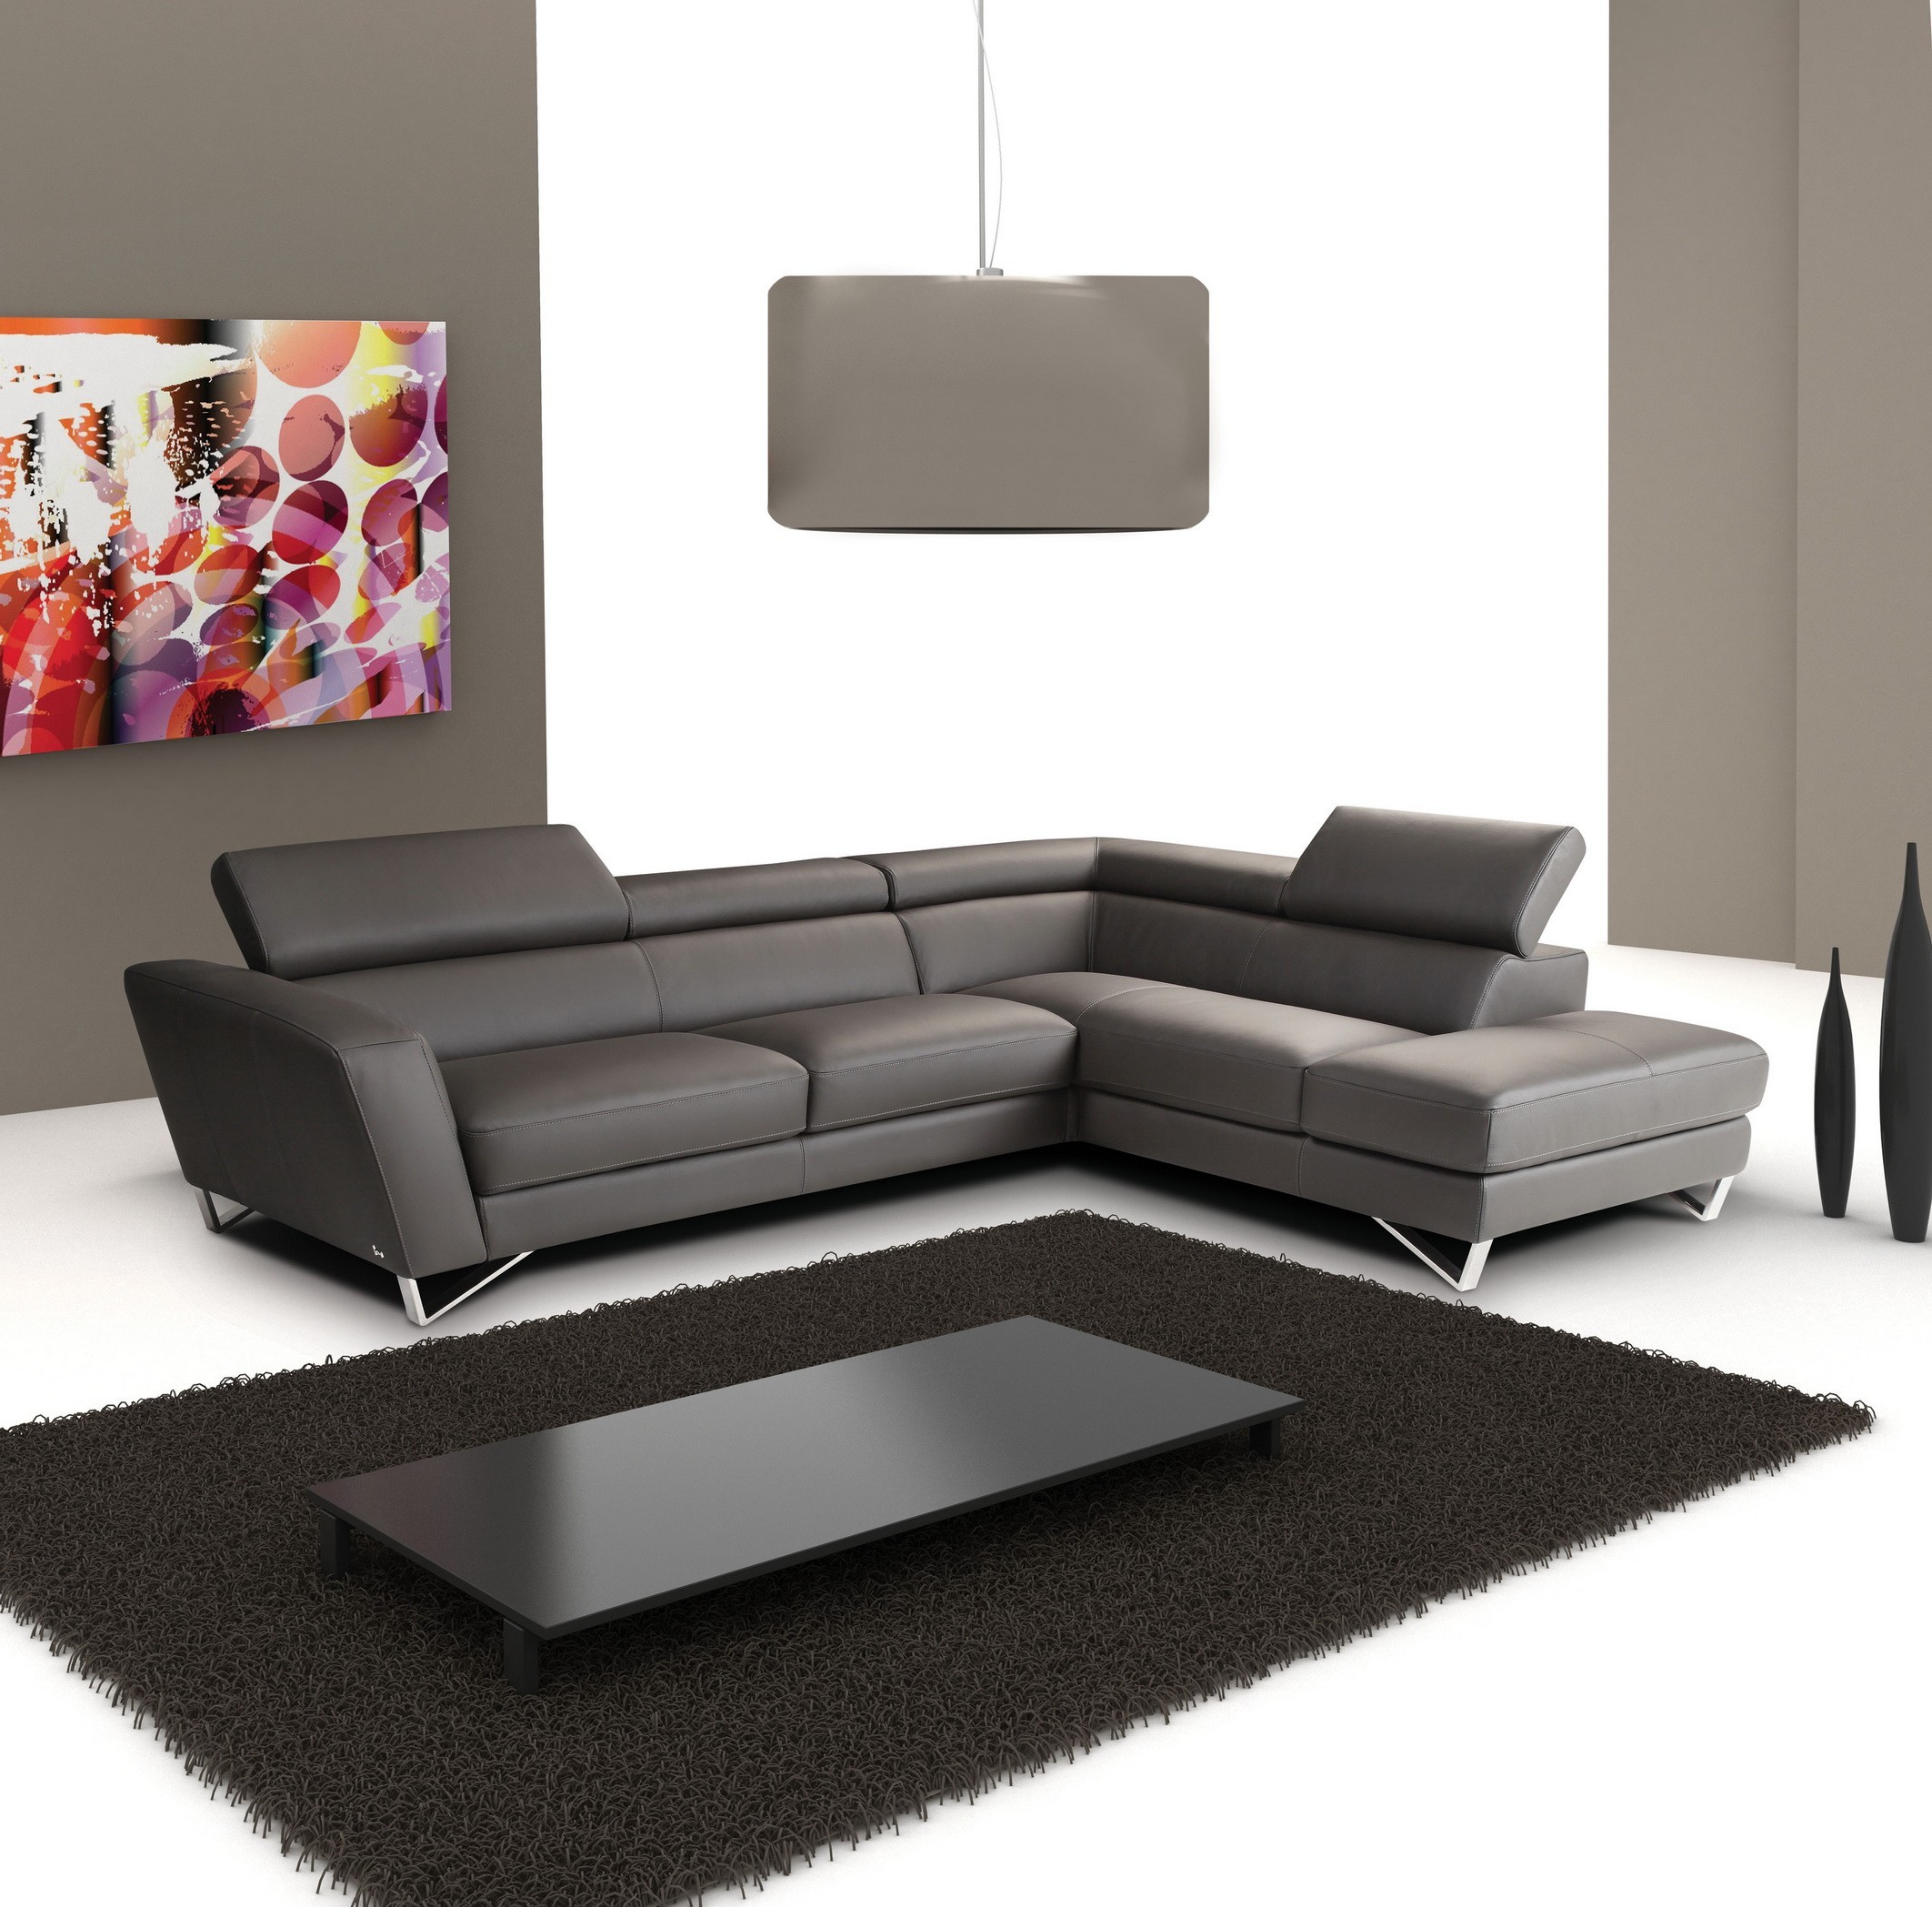 gray-leather-sectional-sleeper-sofa-with-drum-pendant-